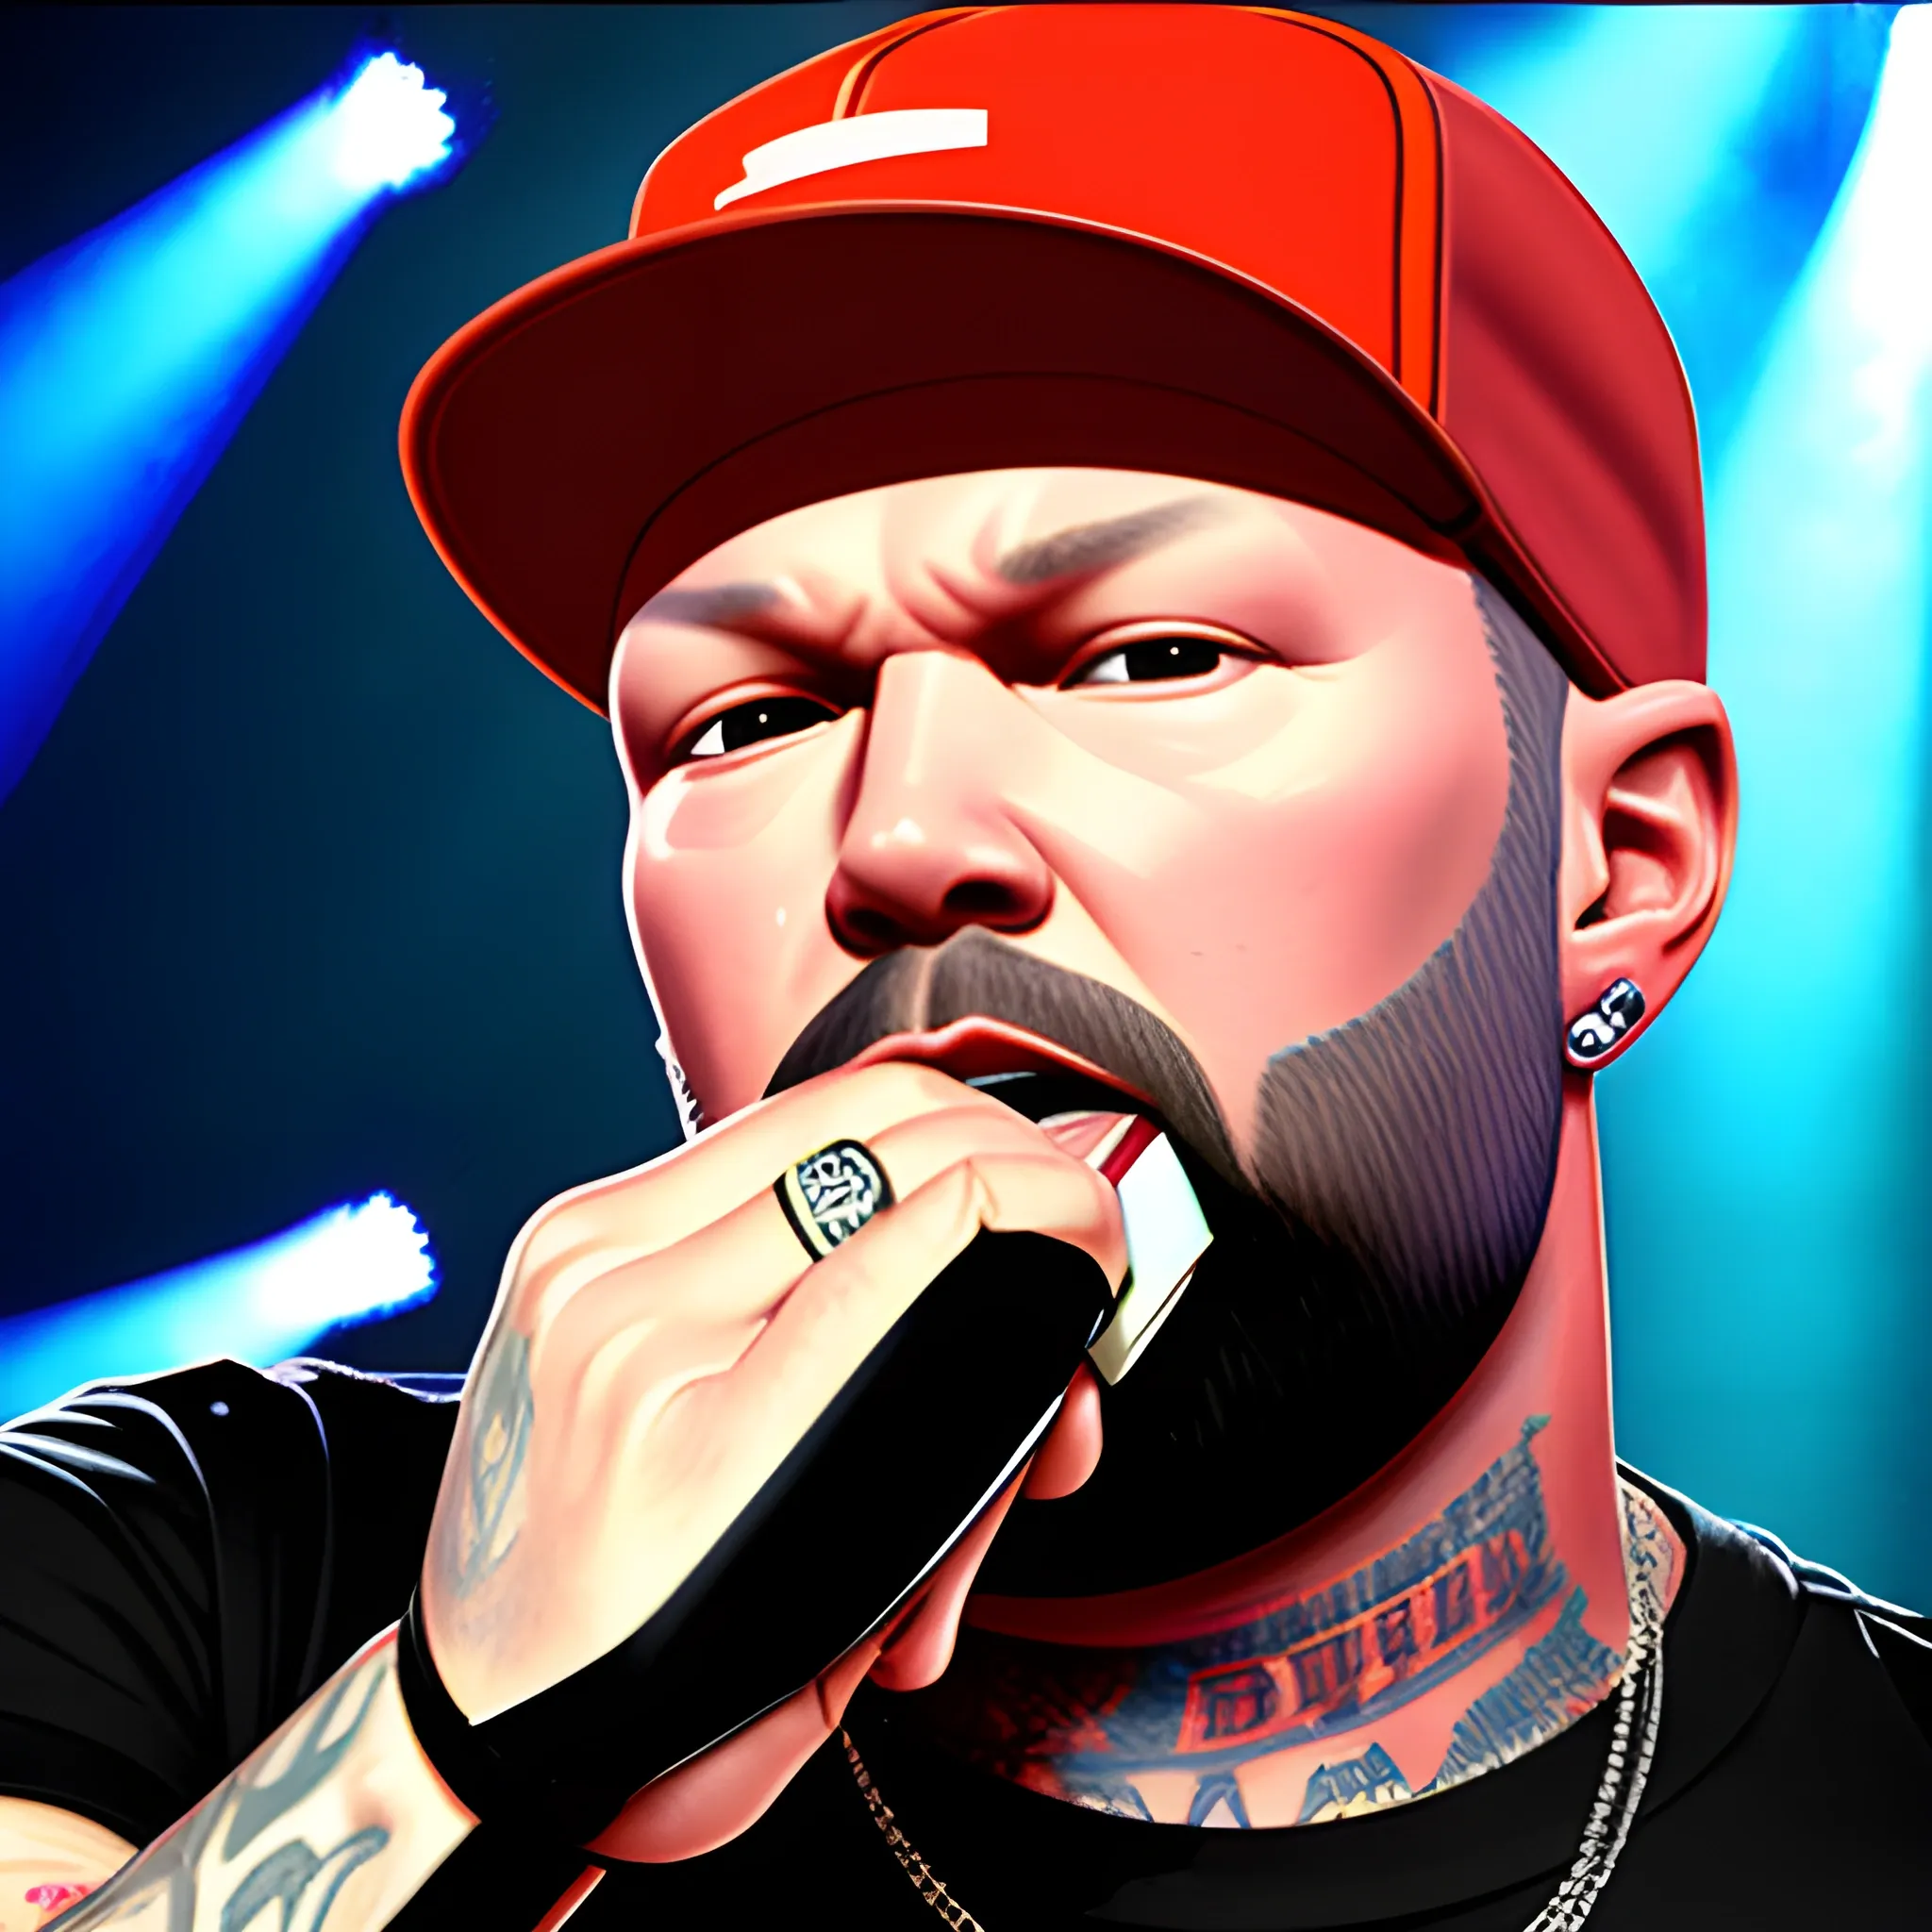 fred durst, on stage, drinking beer, 3d
, Cartoon